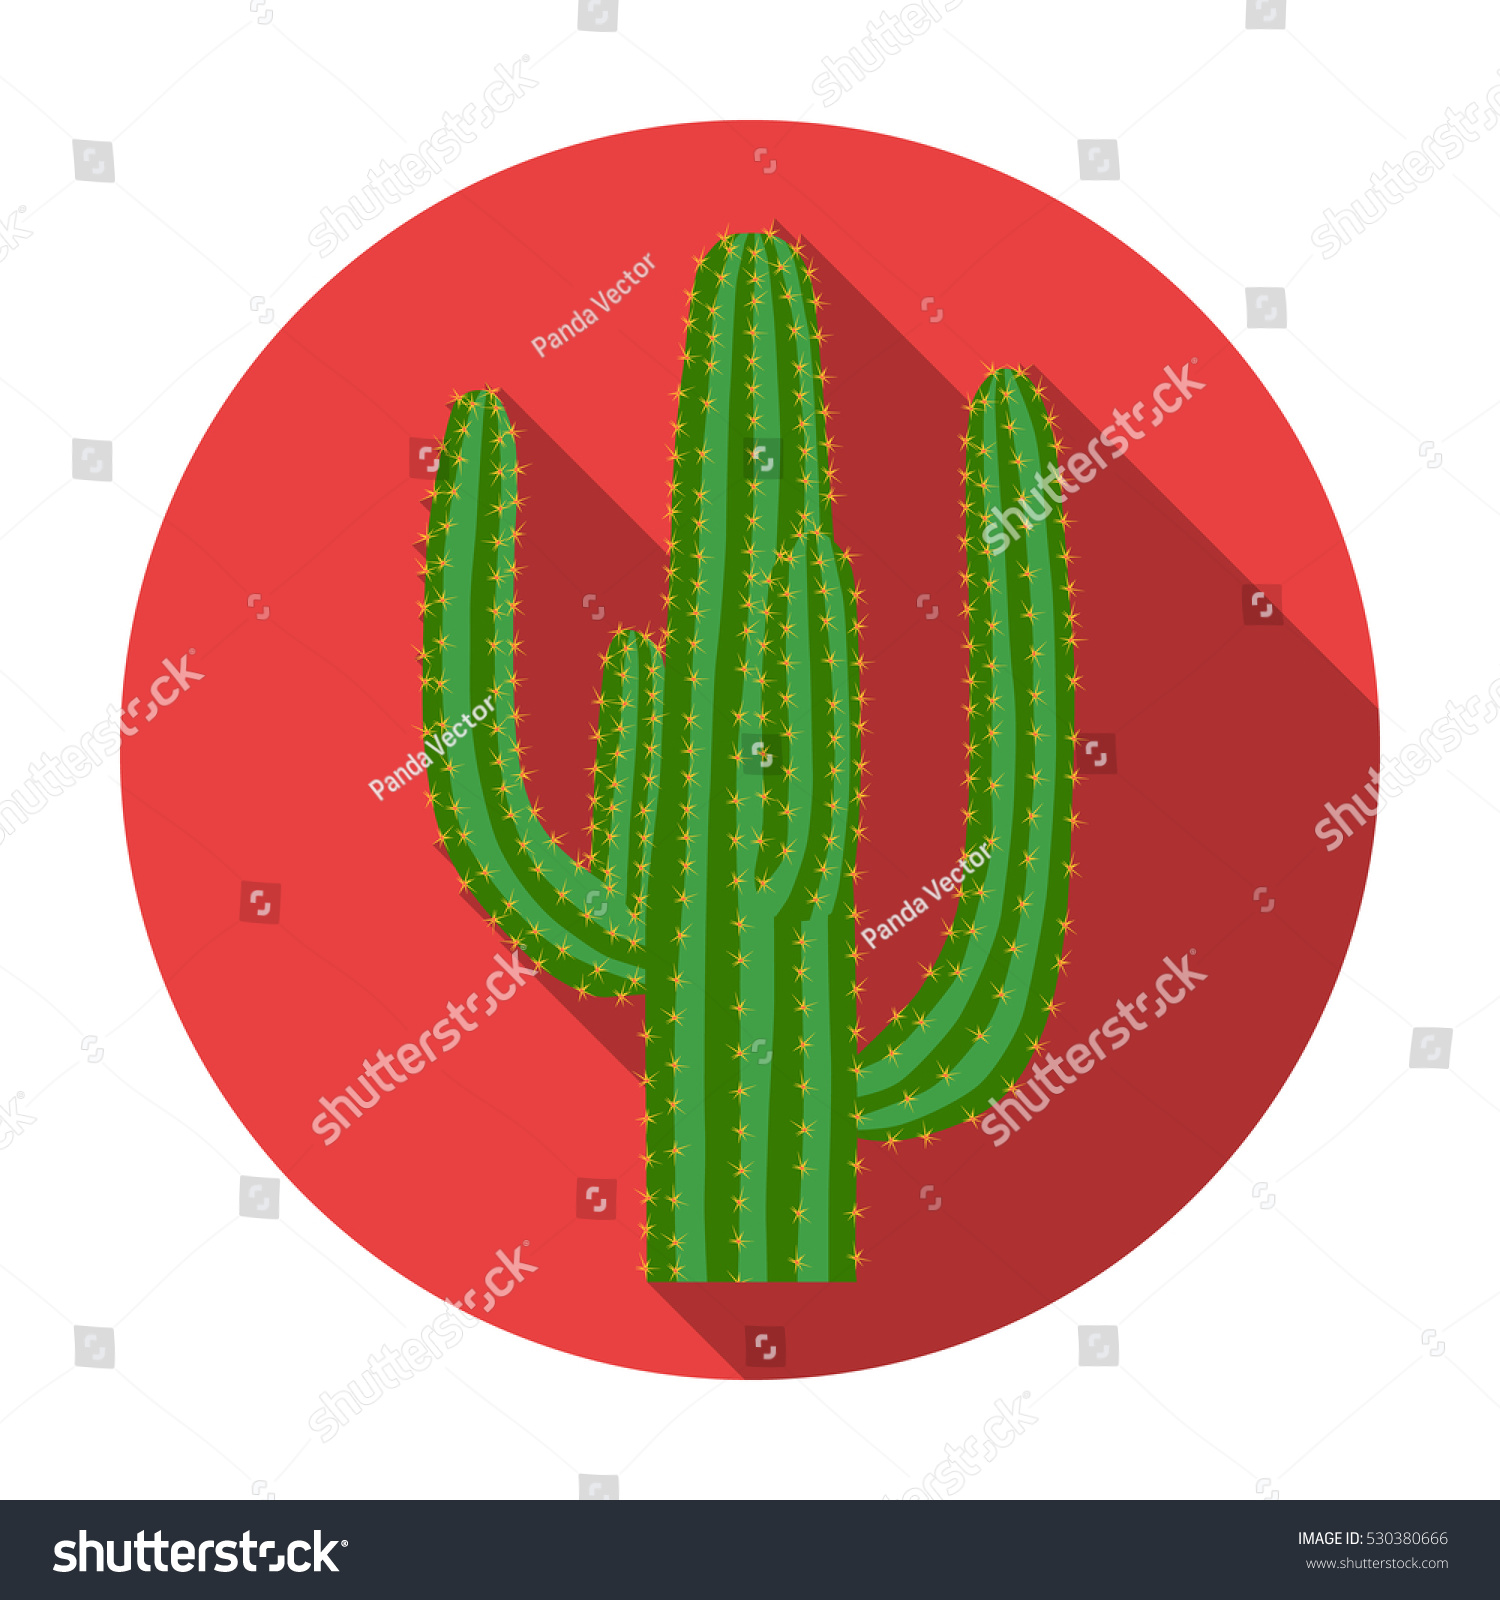 SVG of Mexican cactus icon in flat style isolated on white background. Mexico country symbol stock vector illustration. svg